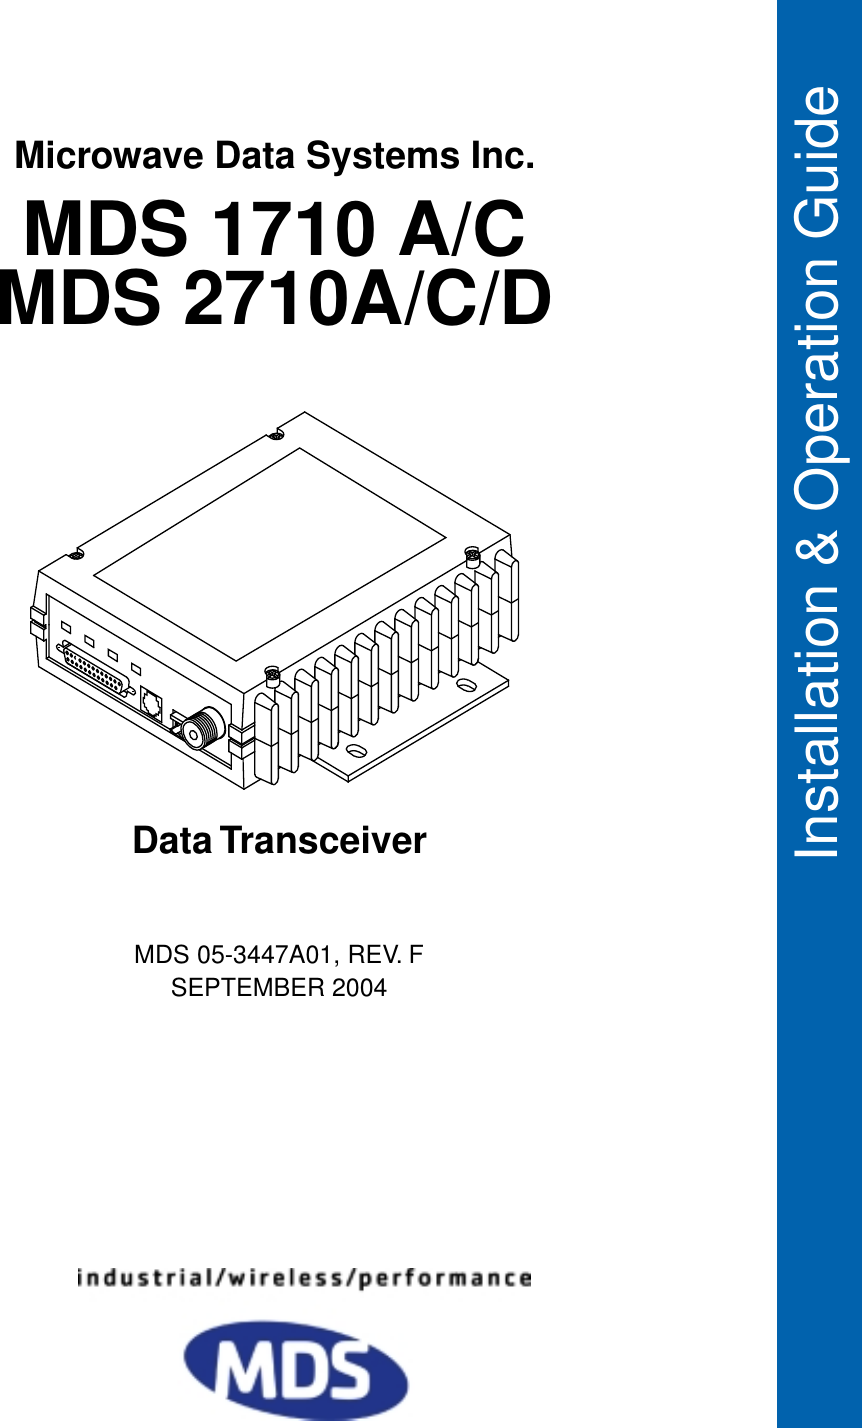  Installation &amp; Operation Guide MDS 05-3447A01, REV. F SEPTEMBER 2004 Data TransceiverMicrowave Data Systems Inc. MDS 1710 A/CMDS 2710A/C/D